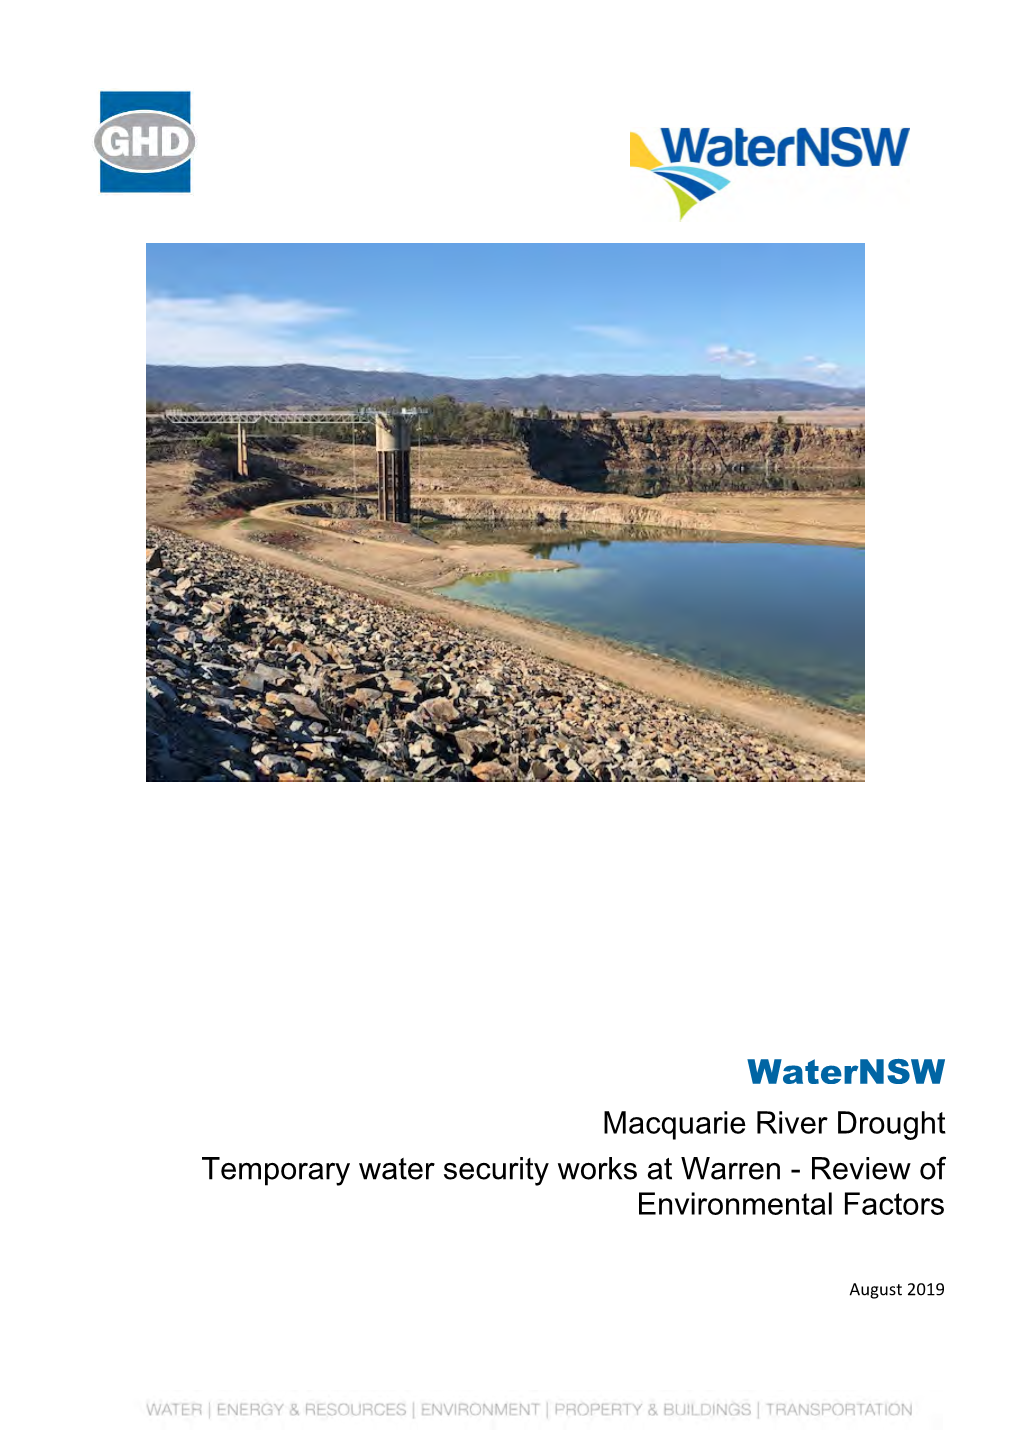 Macquarie River Drought Temporary Water Security Works at Warren - Review of Environmental Factors